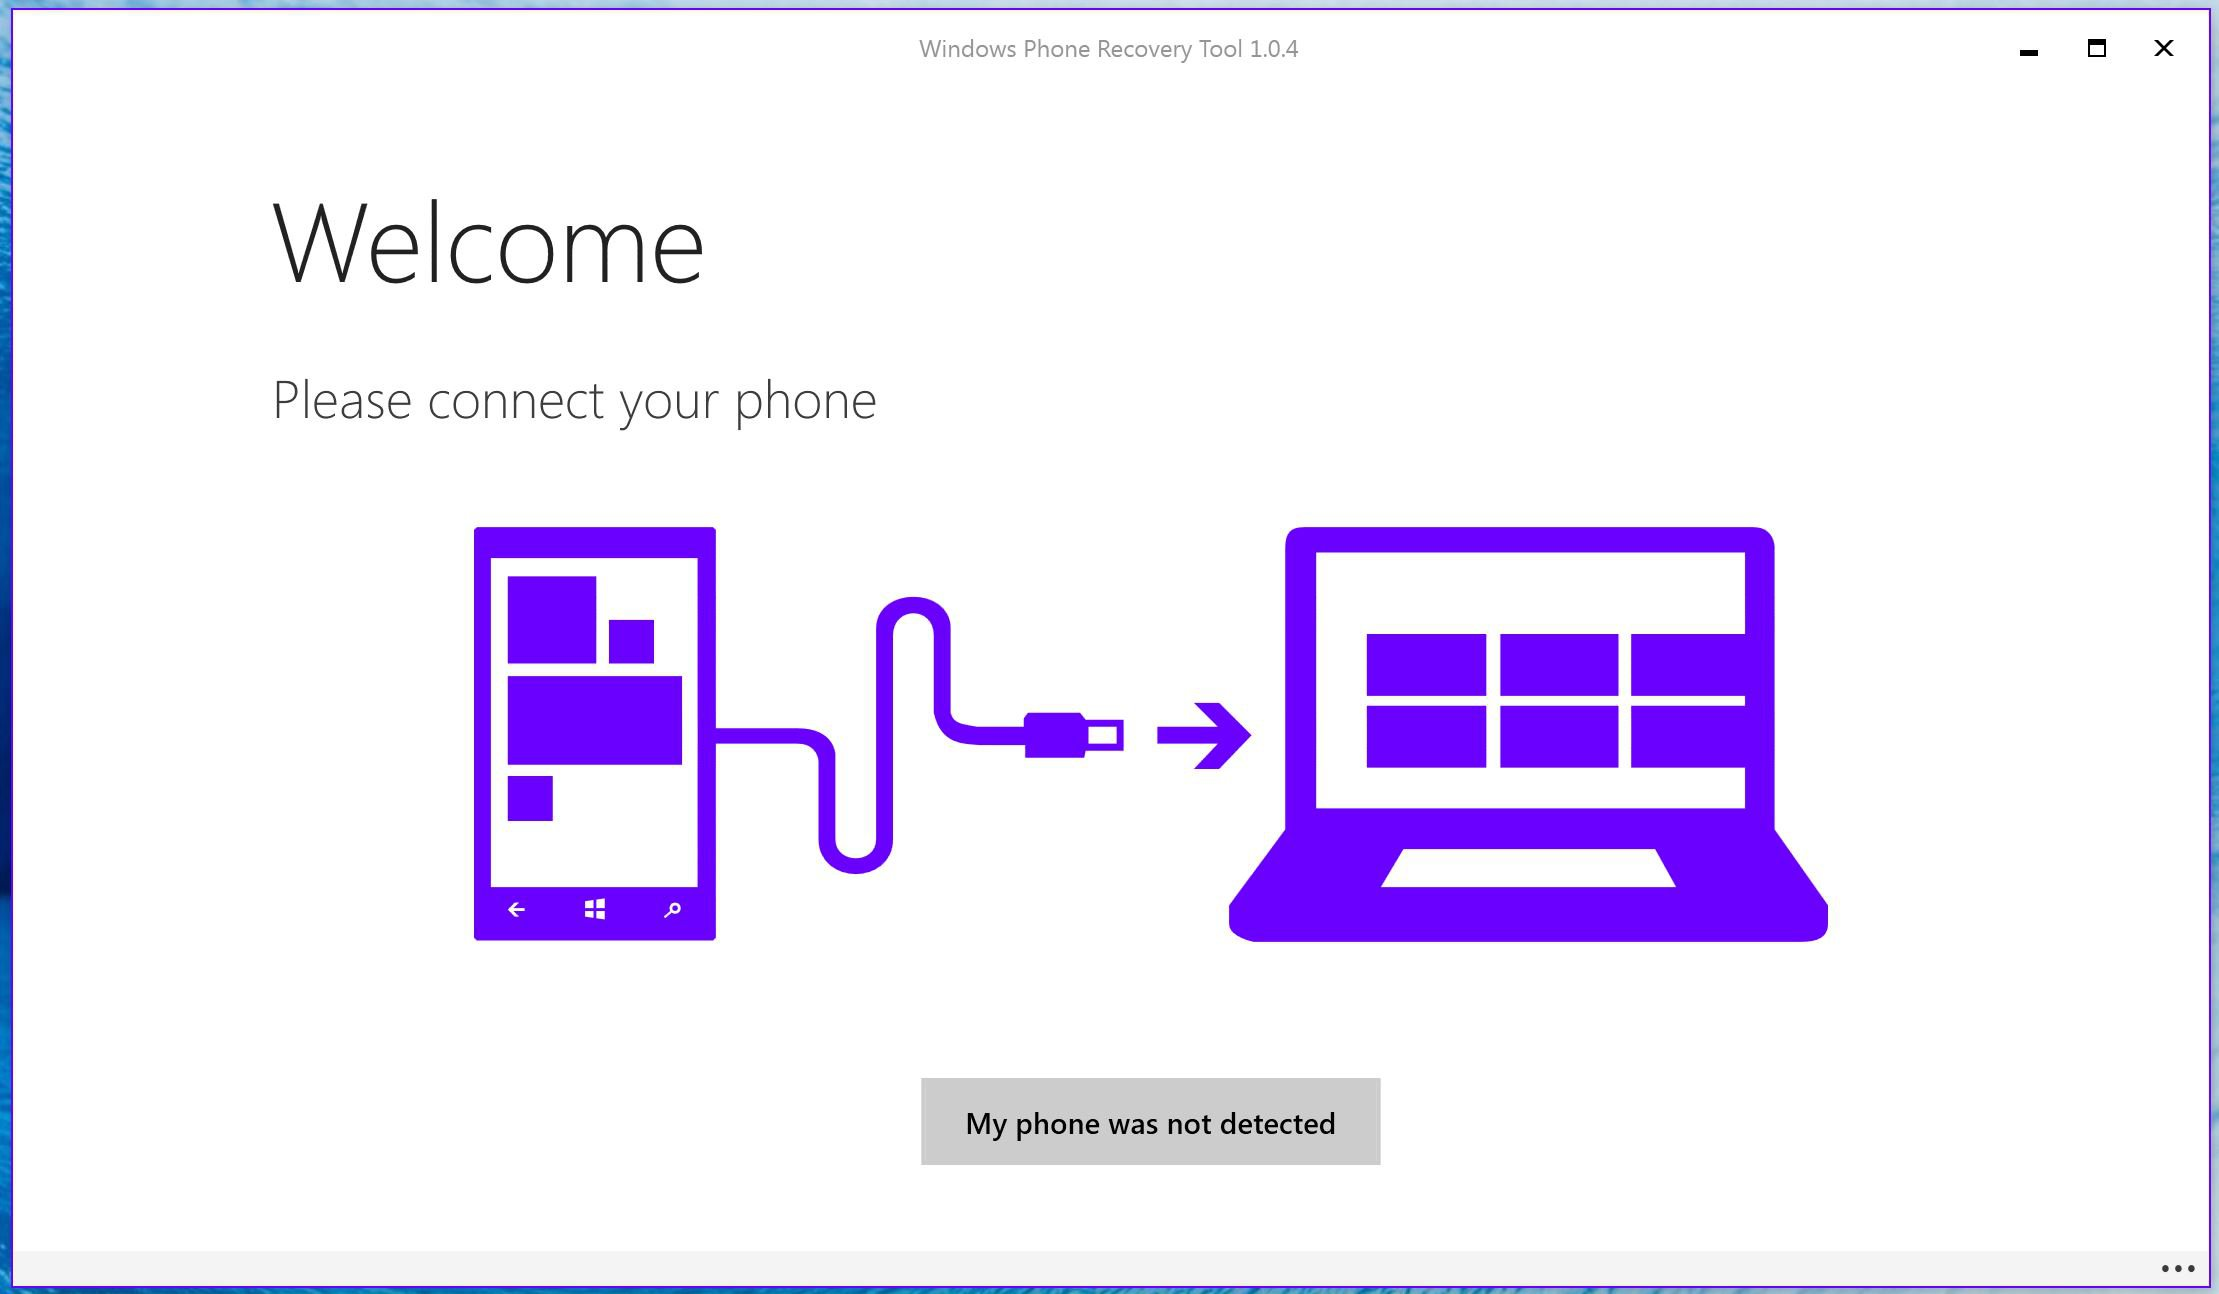 Device recover. Windows Recovery Tool. Windows device Recovery Tool. Windows Phone Recovery Tool. Tools and devices.